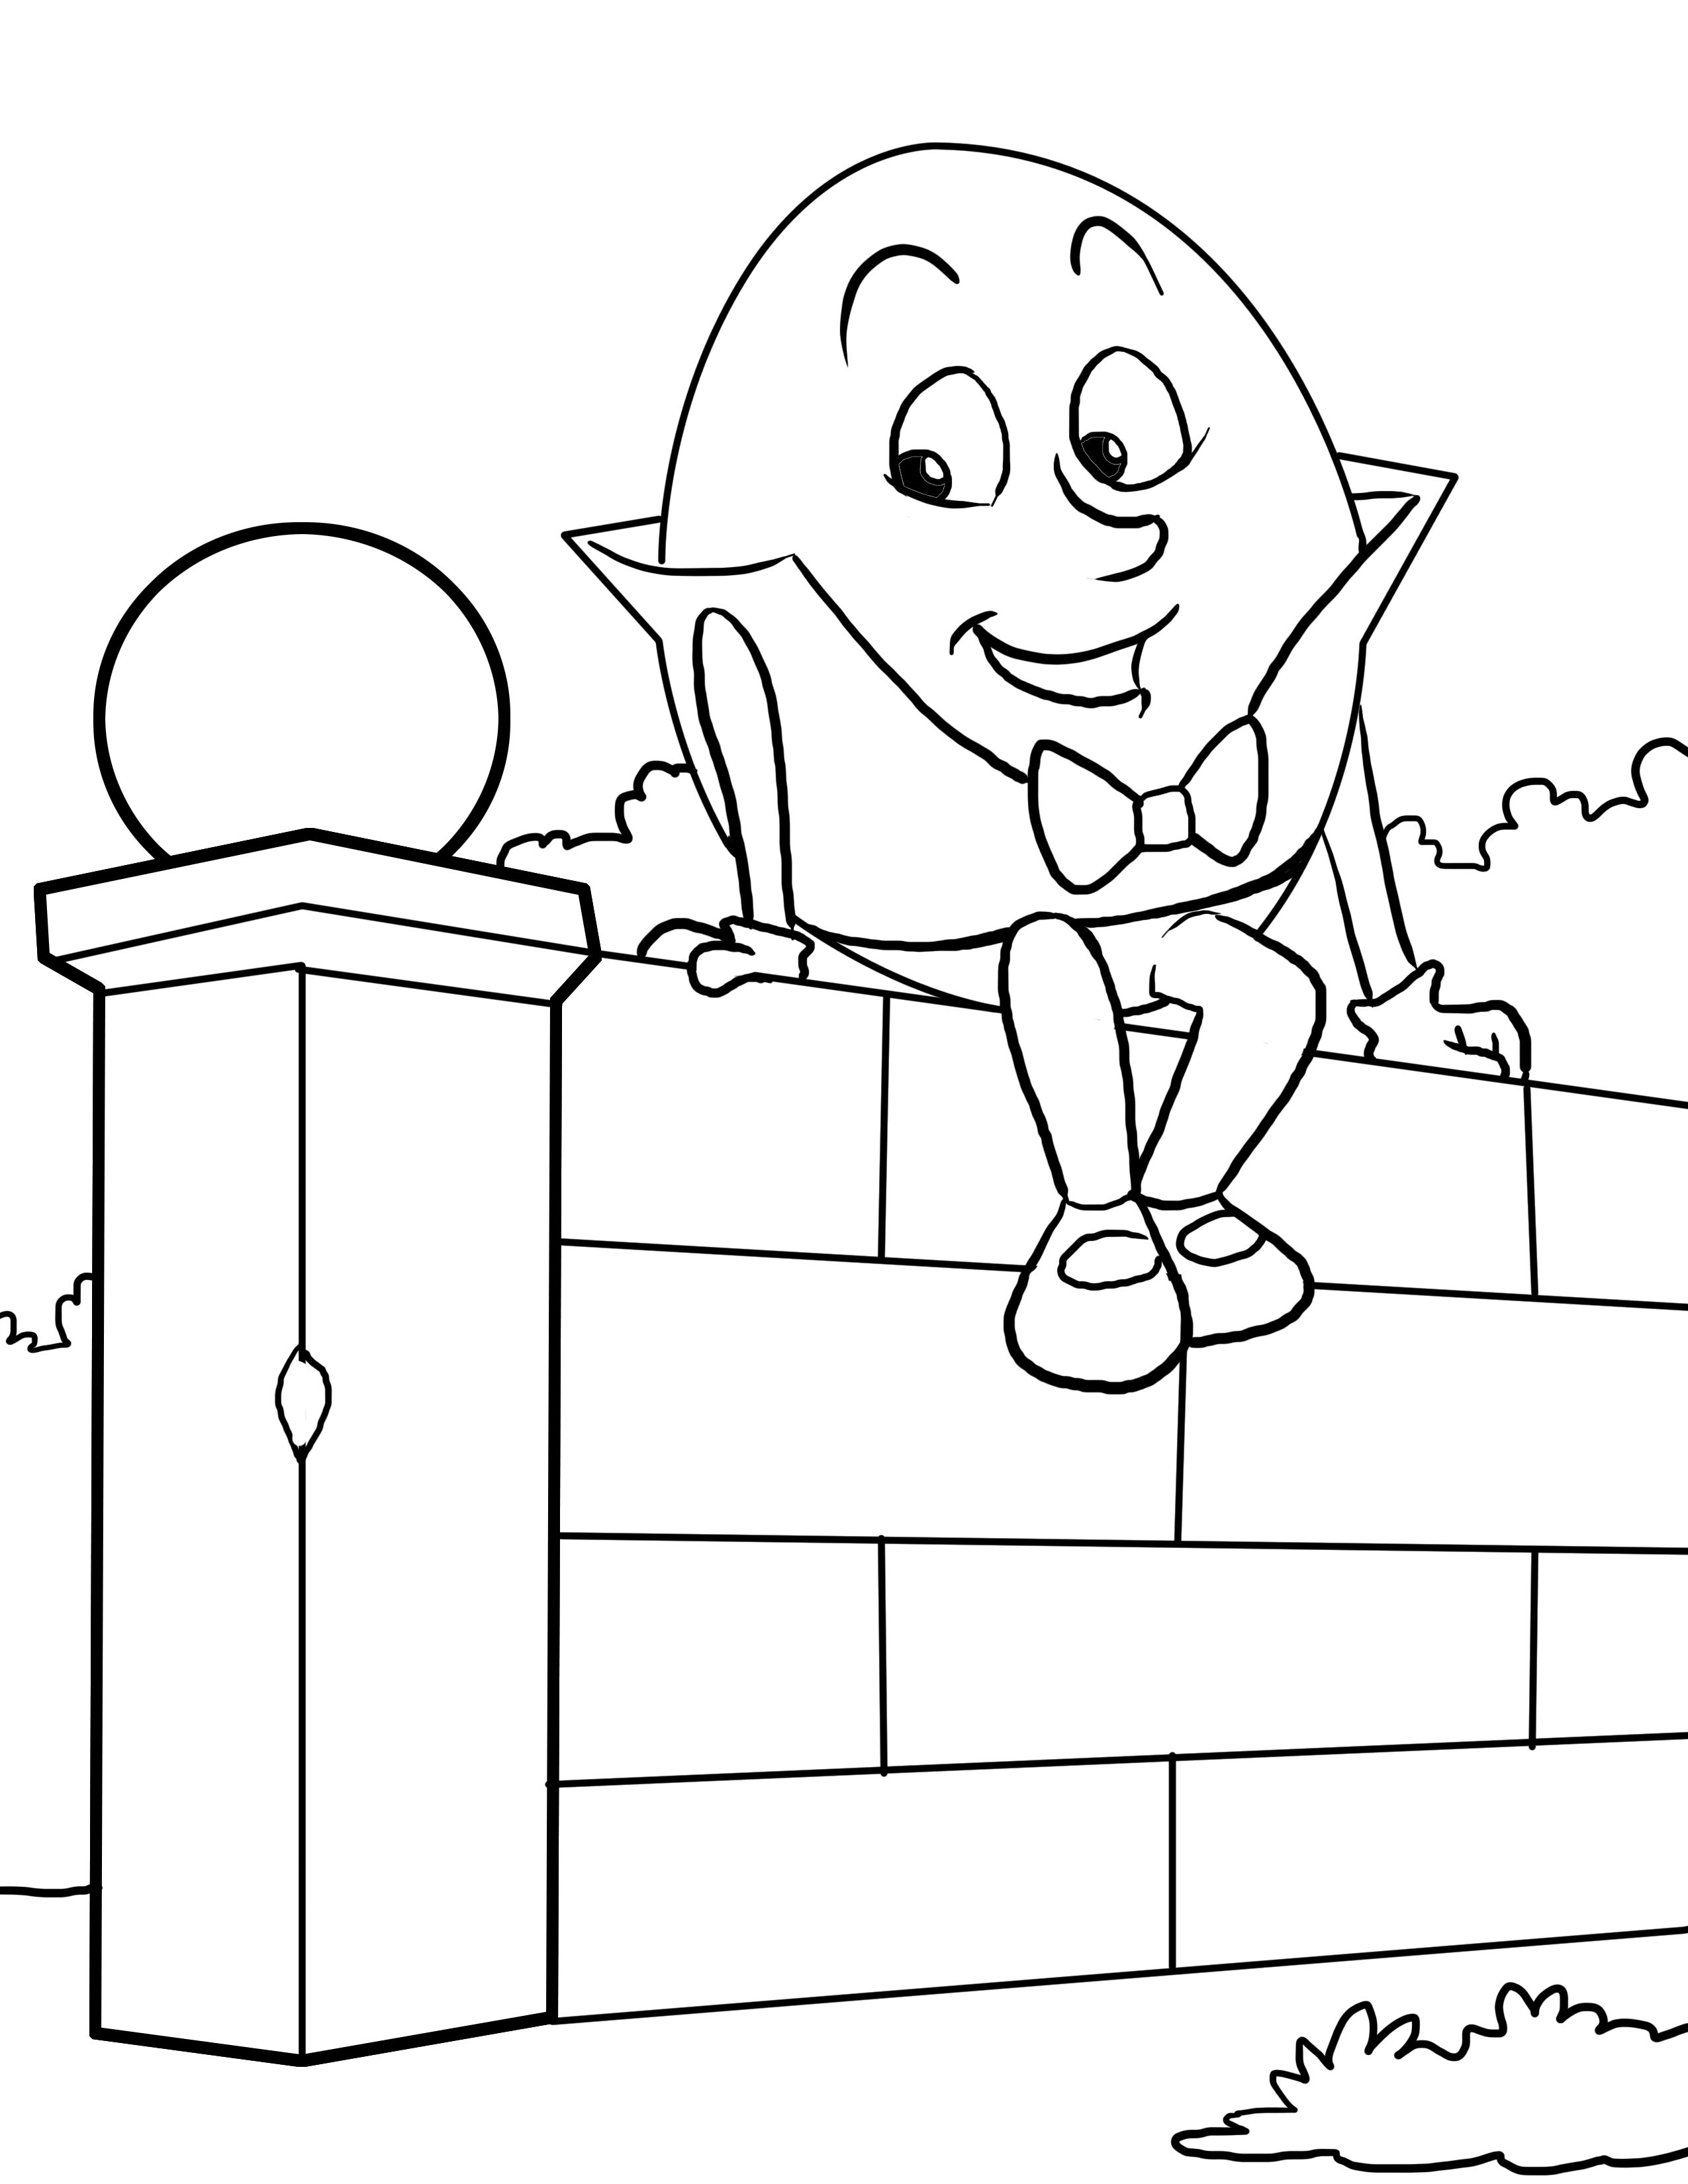 Printable Humpty Dumpty Template - Printable Word Searches